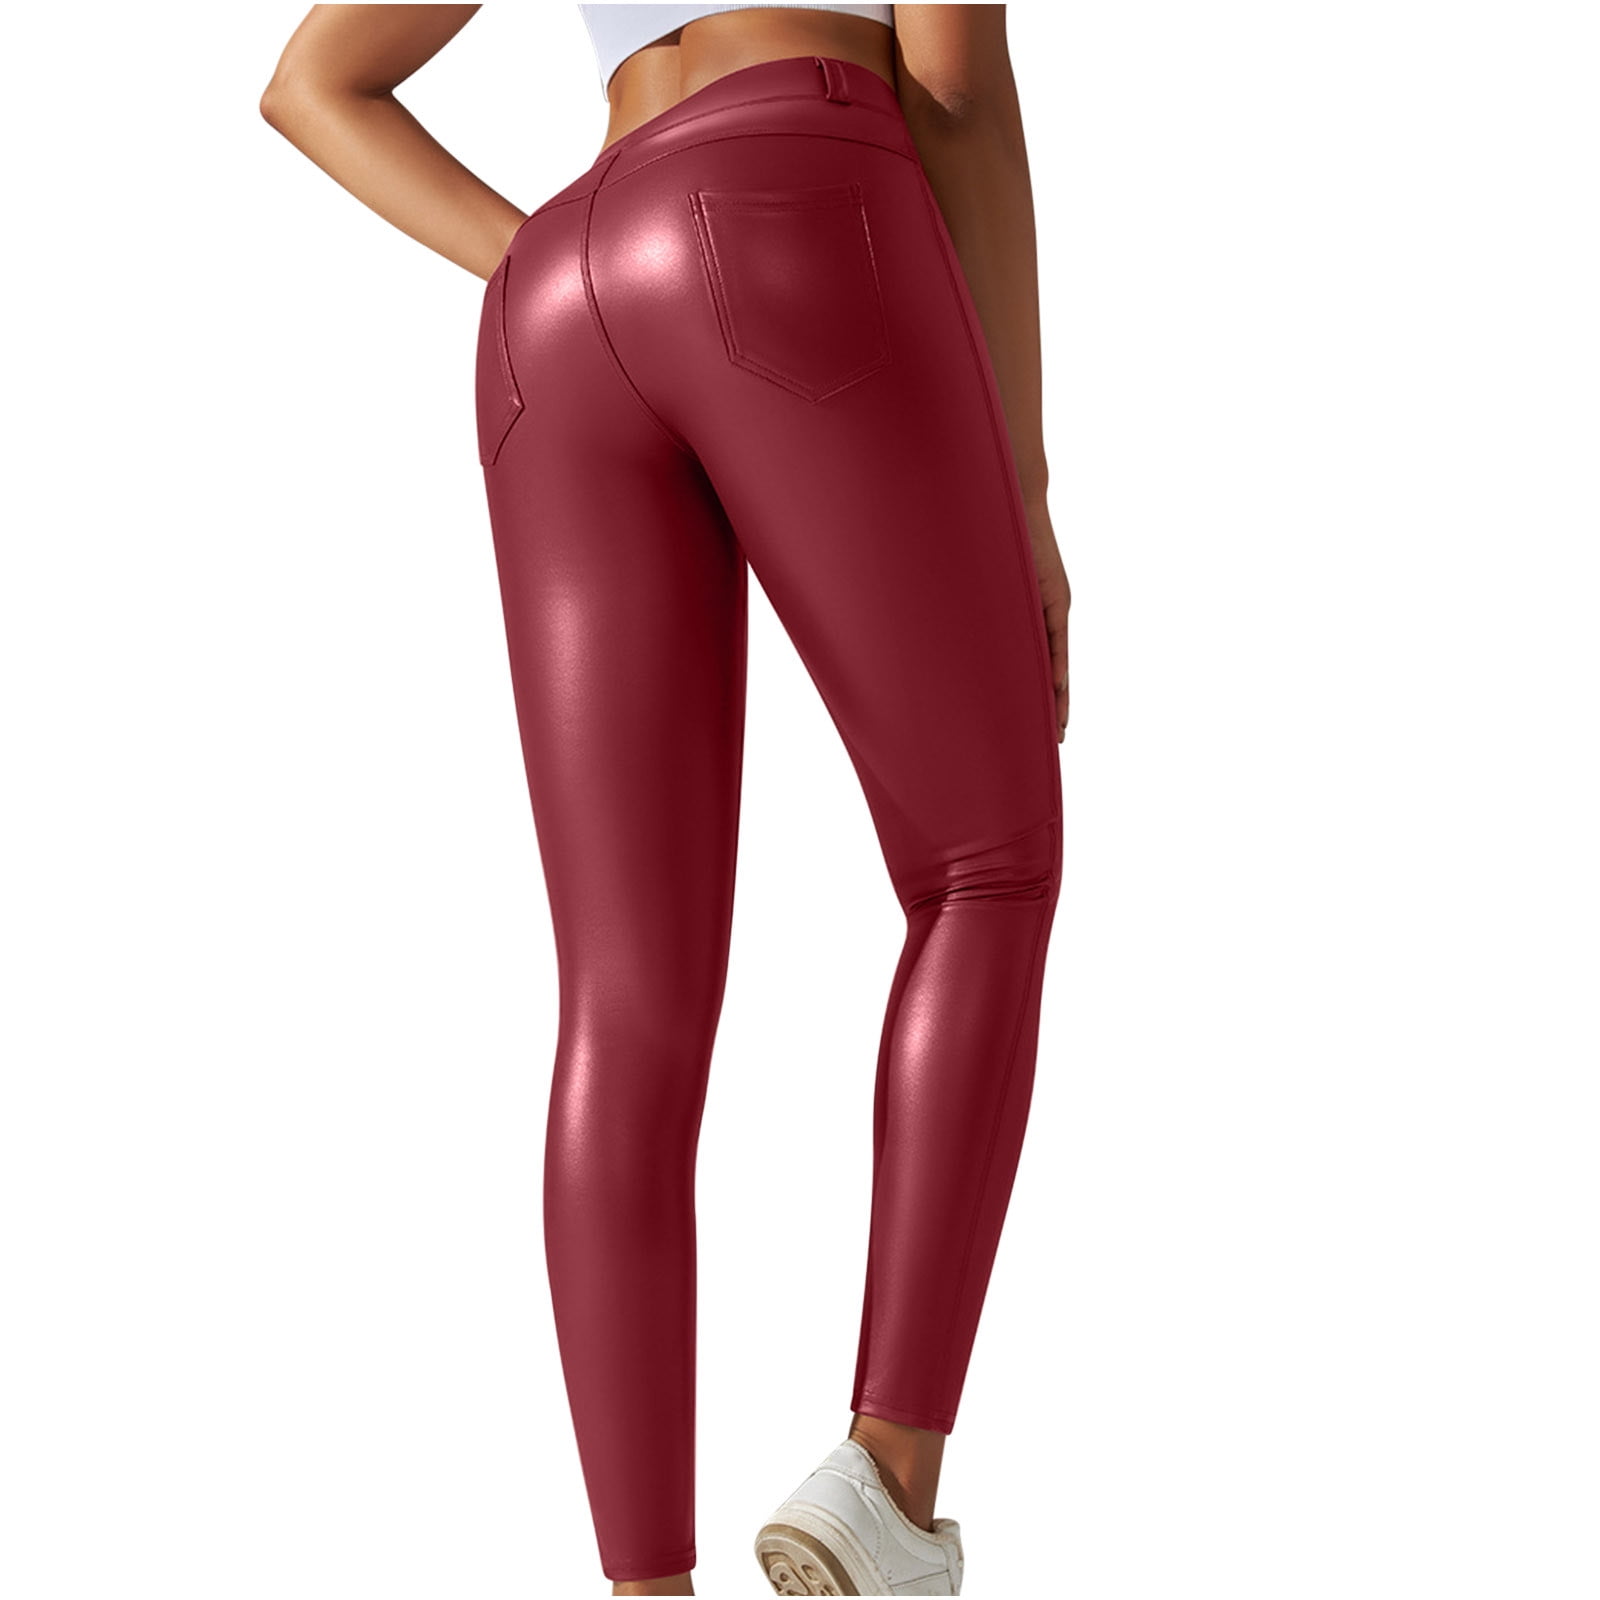 Faux Leather Leggings for Women High Waist Butt Lifting Sexy